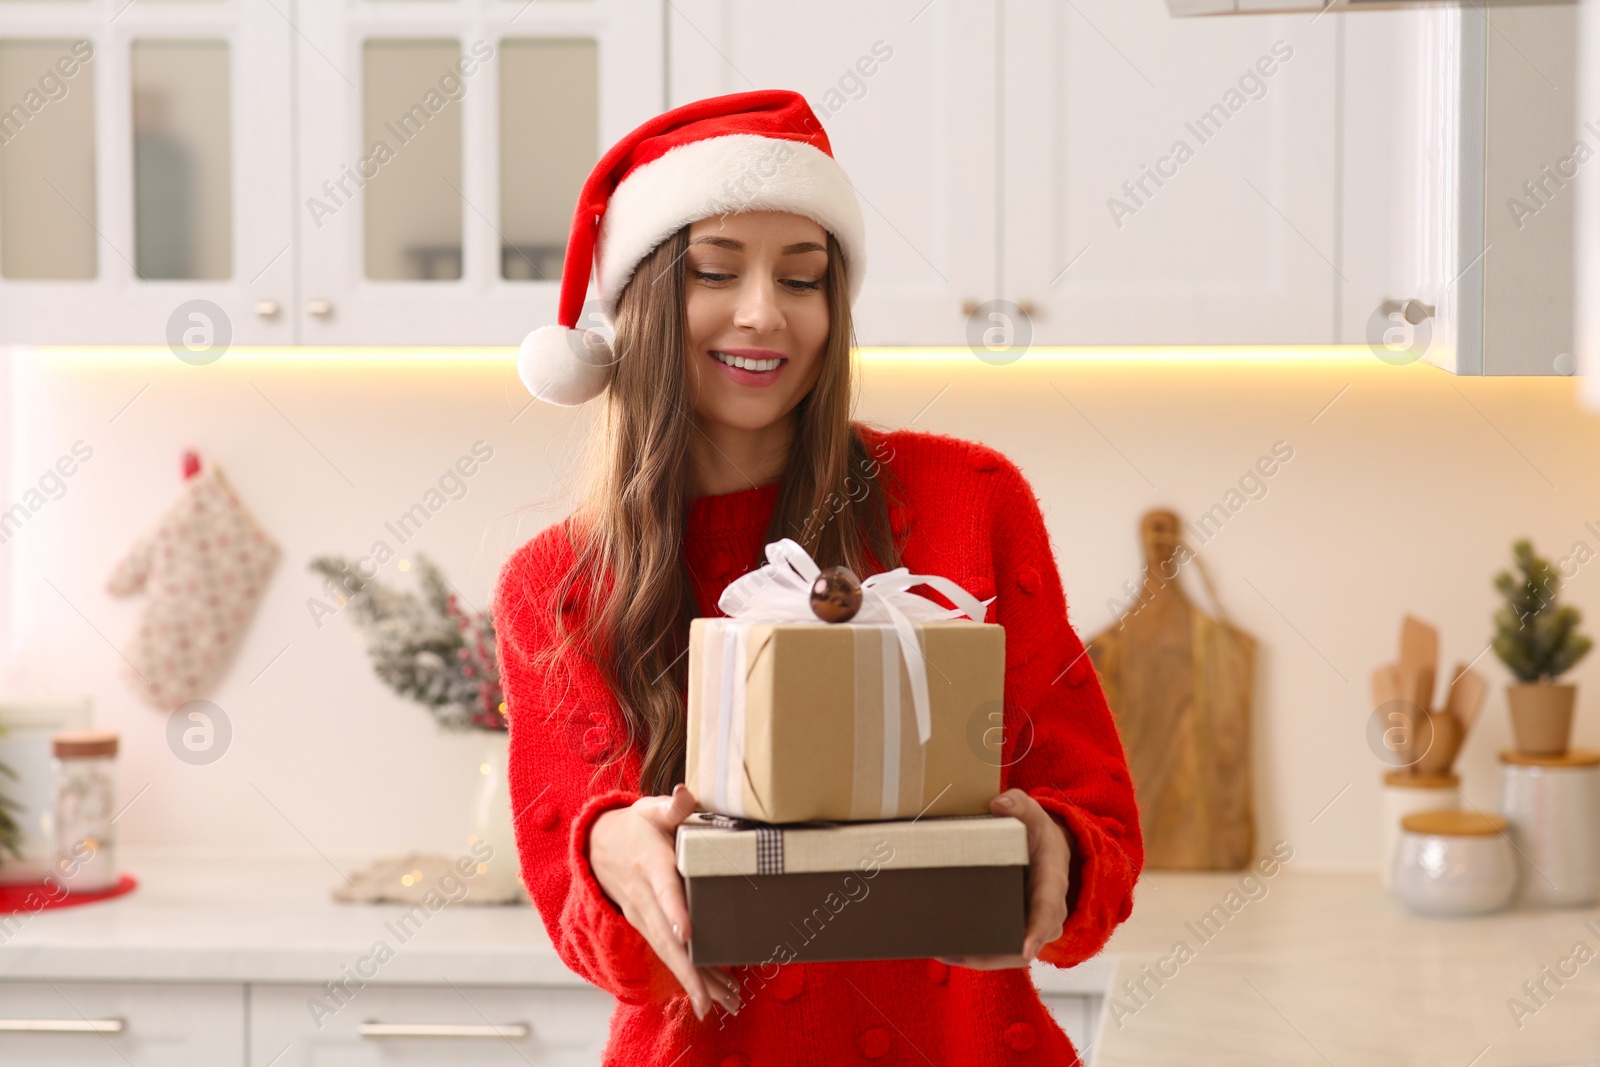 Photo of Beautiful young woman in Santa hat with presents in kitchen. Celebrating Christmas